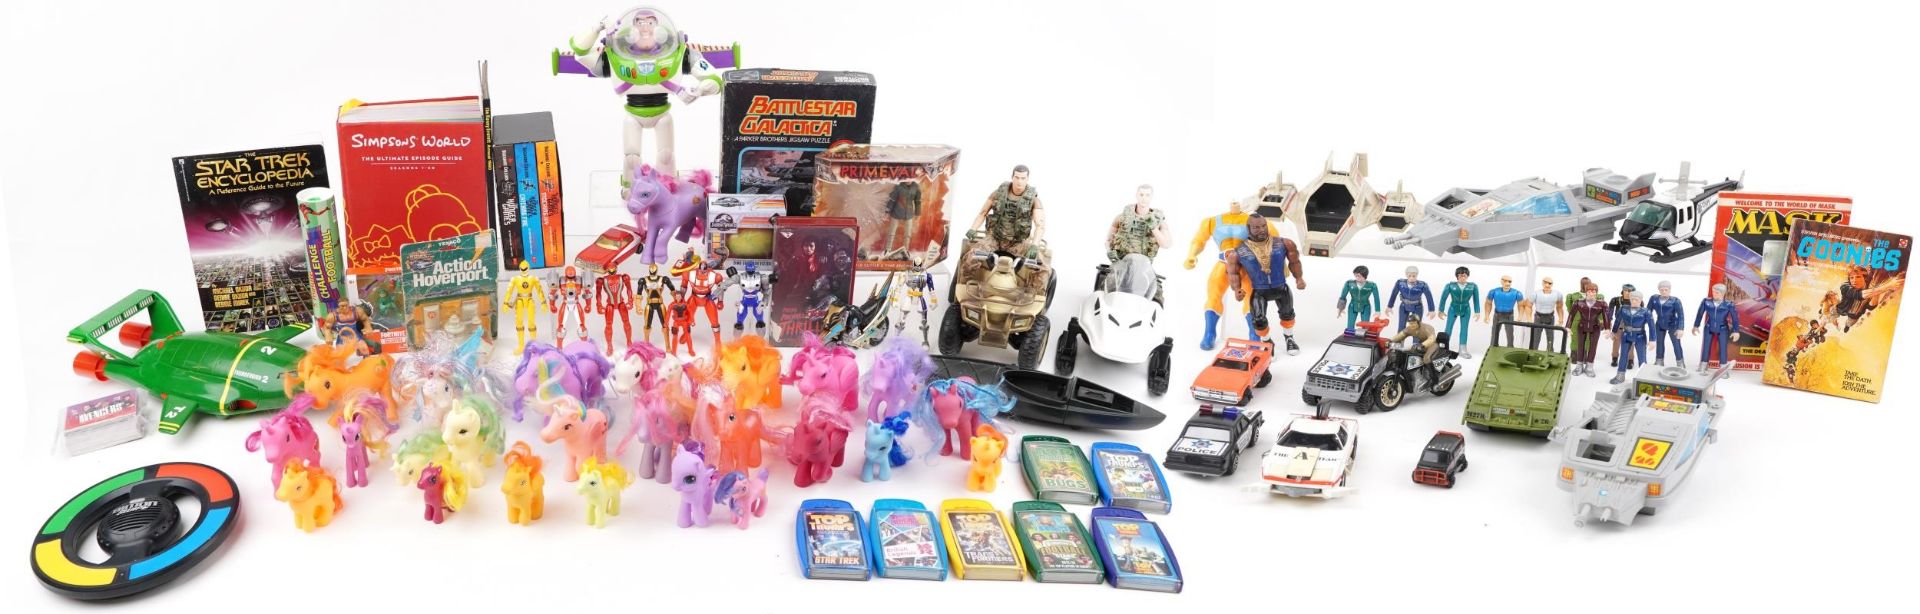 Vintage and later toys and related including My Little Ponies, Thunderbirds, Action Hover Port by